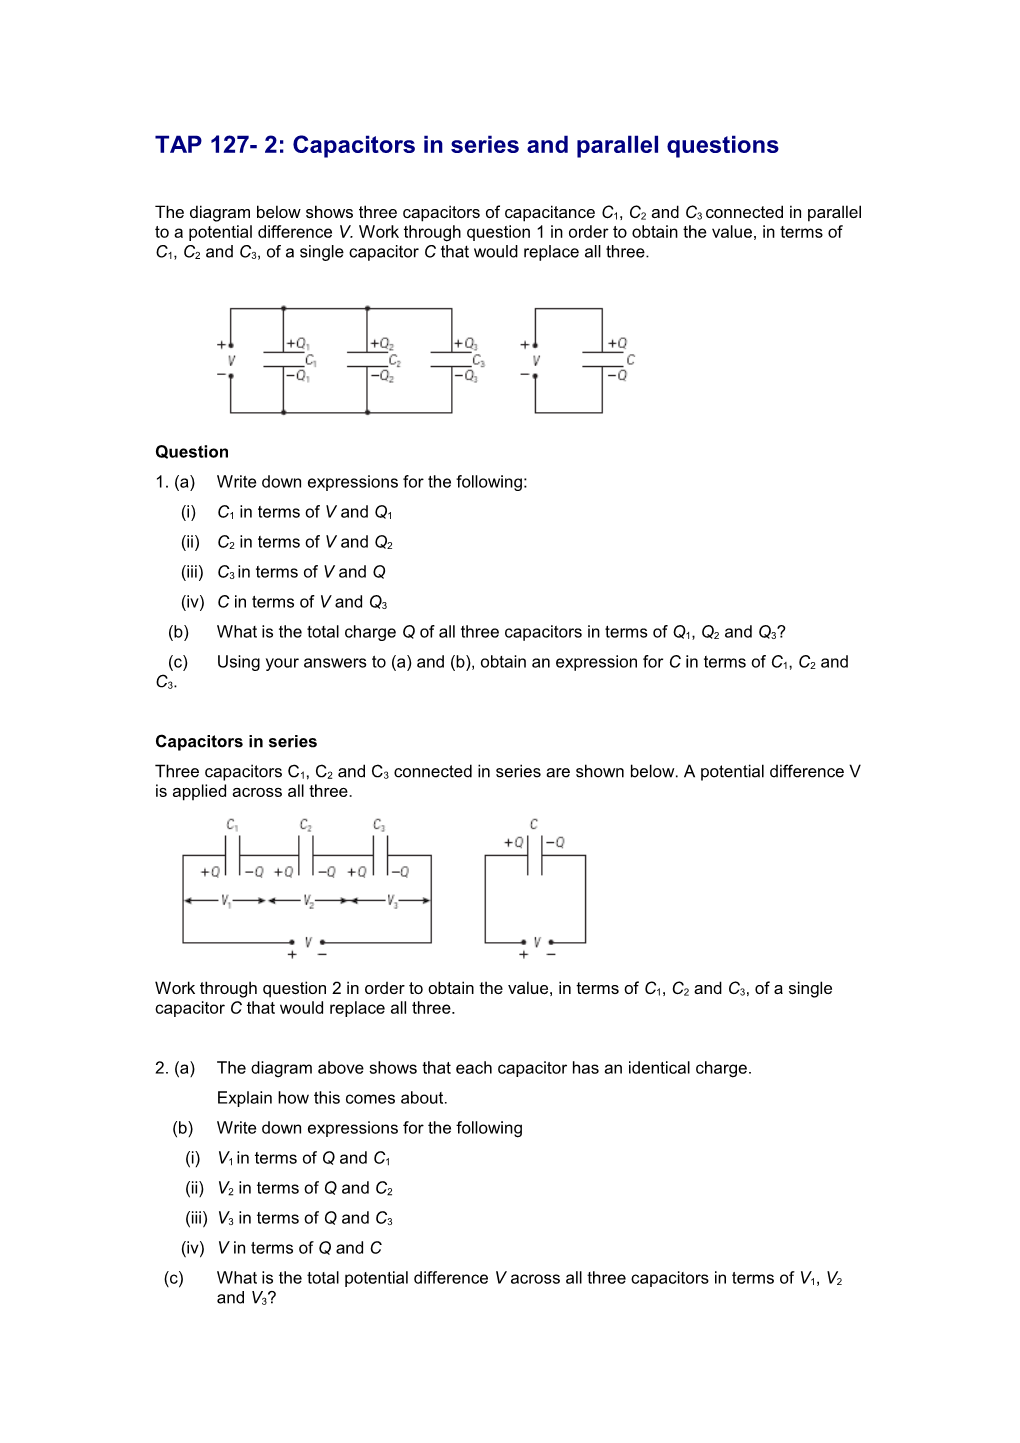 TAP 127- 2: Capacitors in Series and Parallel Questions